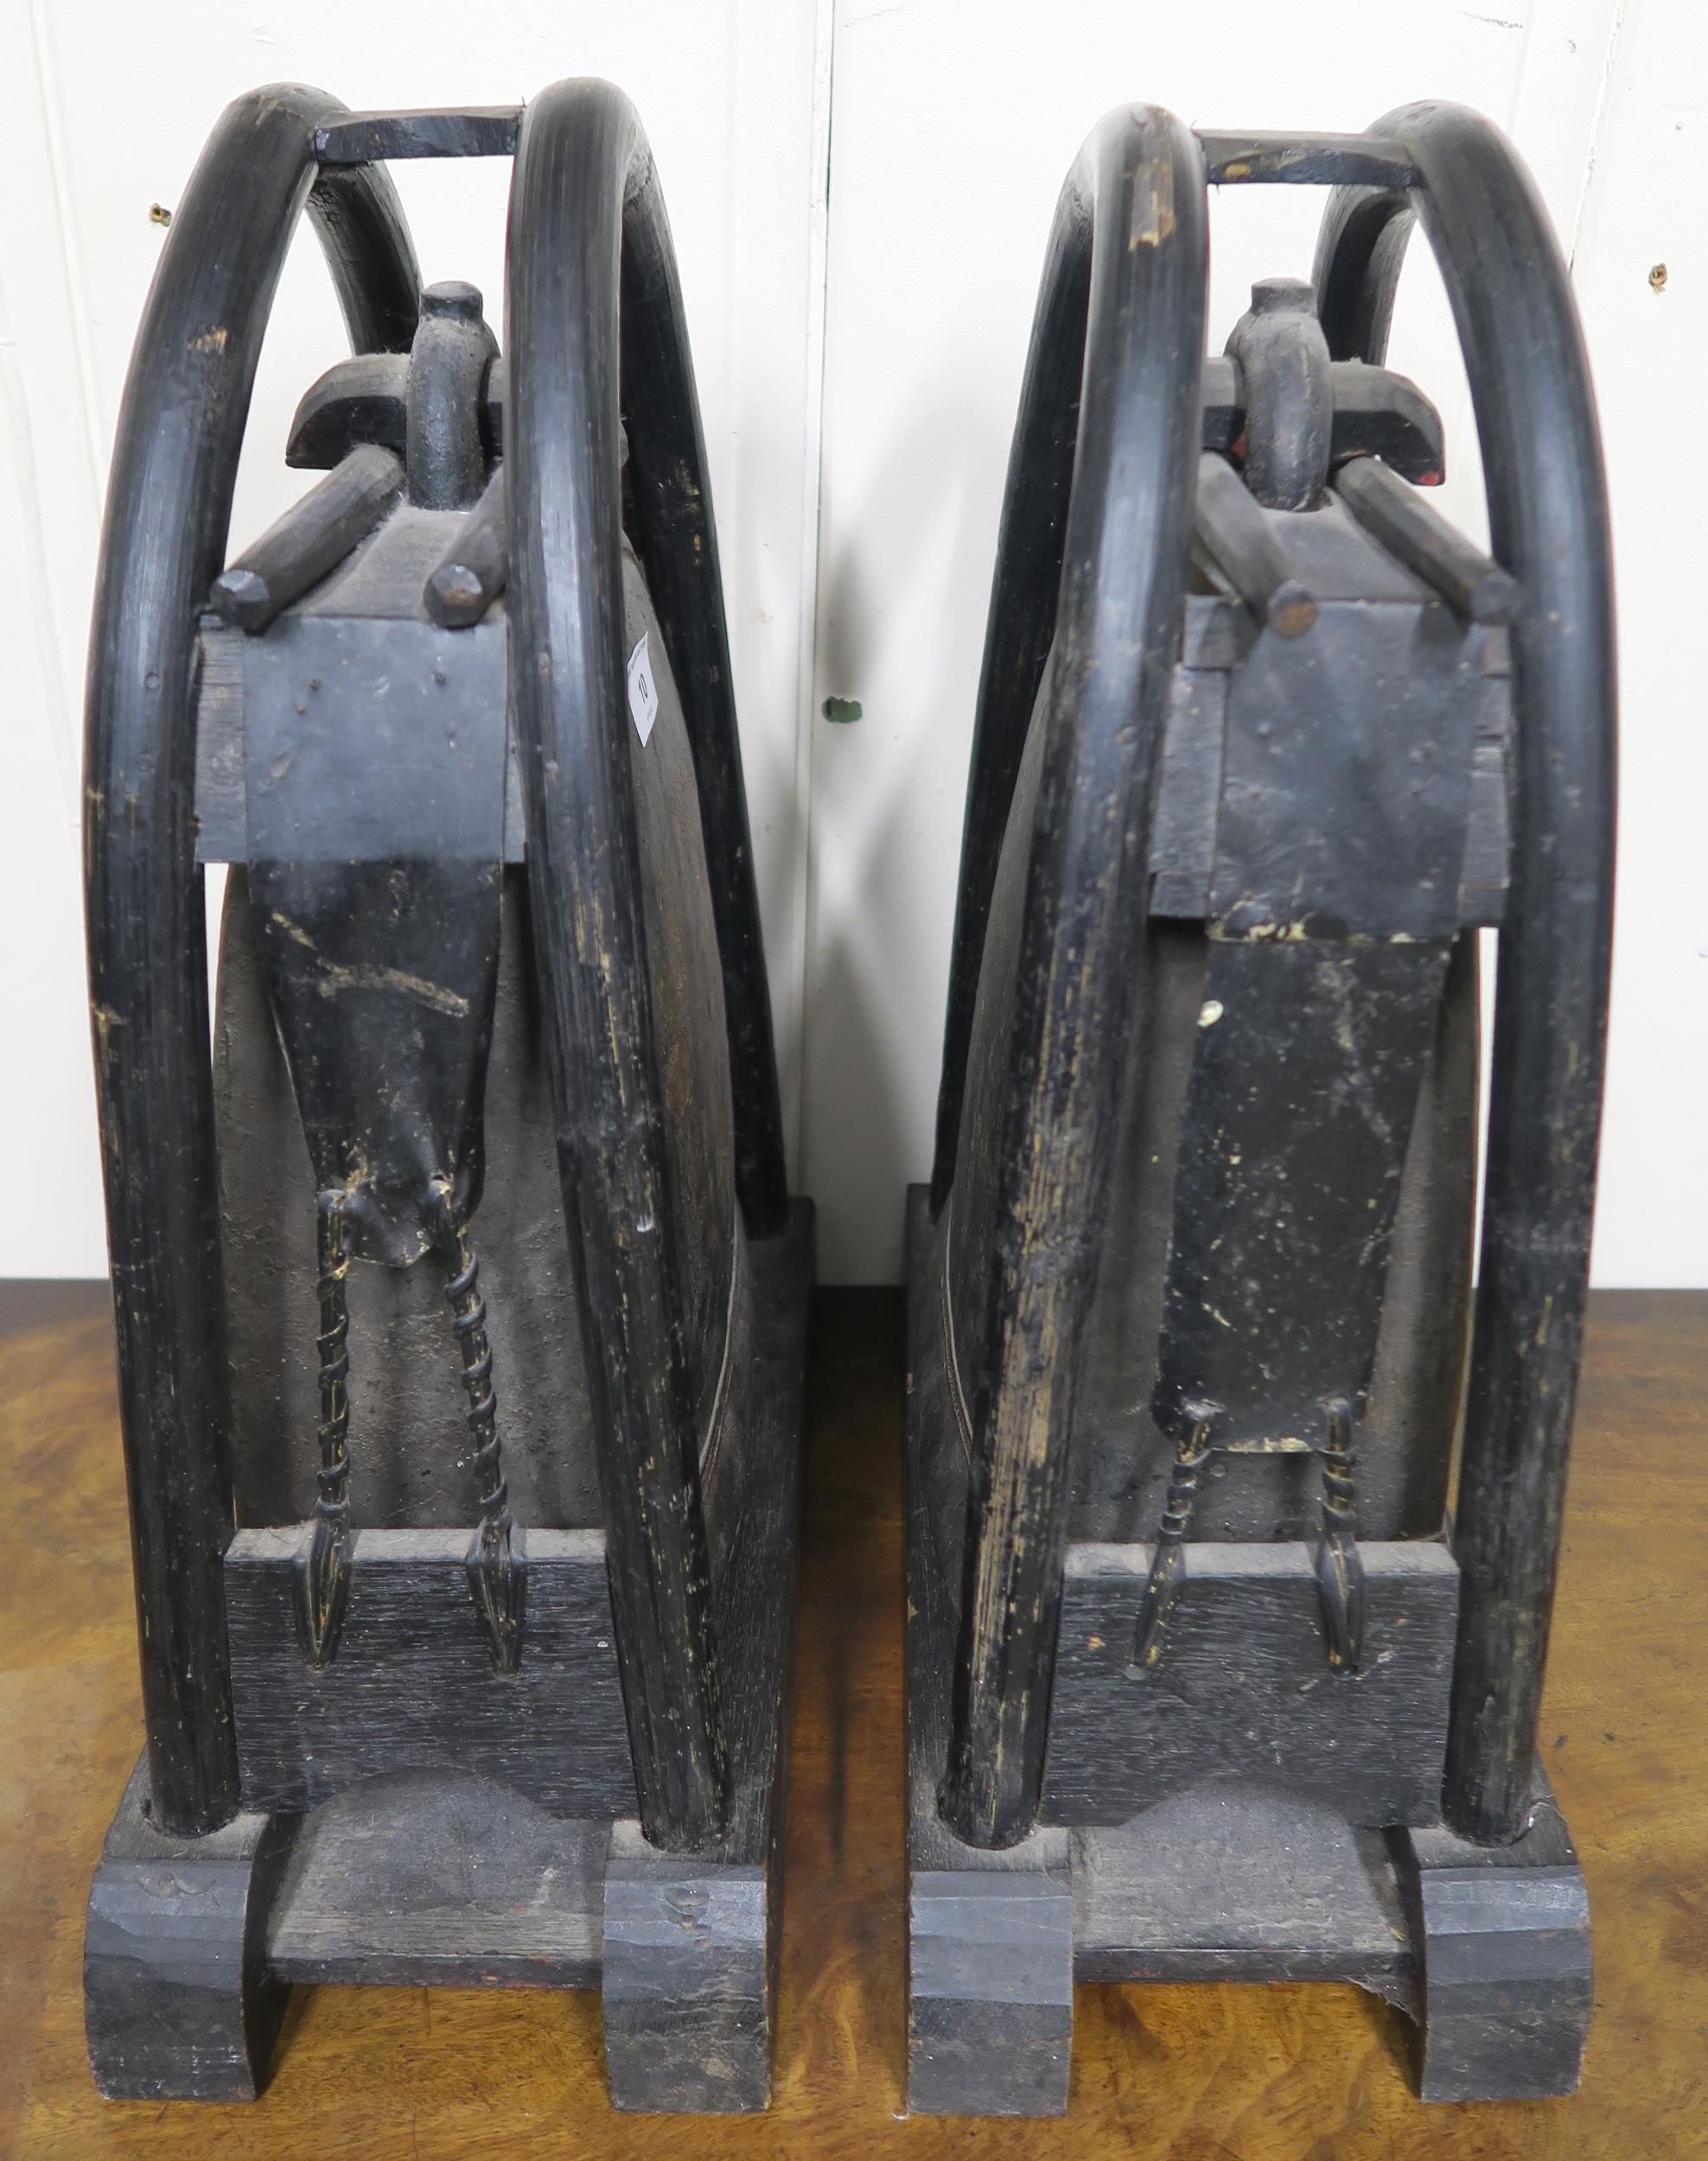 A pair of 19th century bronze Tibetan elephant temple bells on ebonised bentwood stands (2) - Image 2 of 2